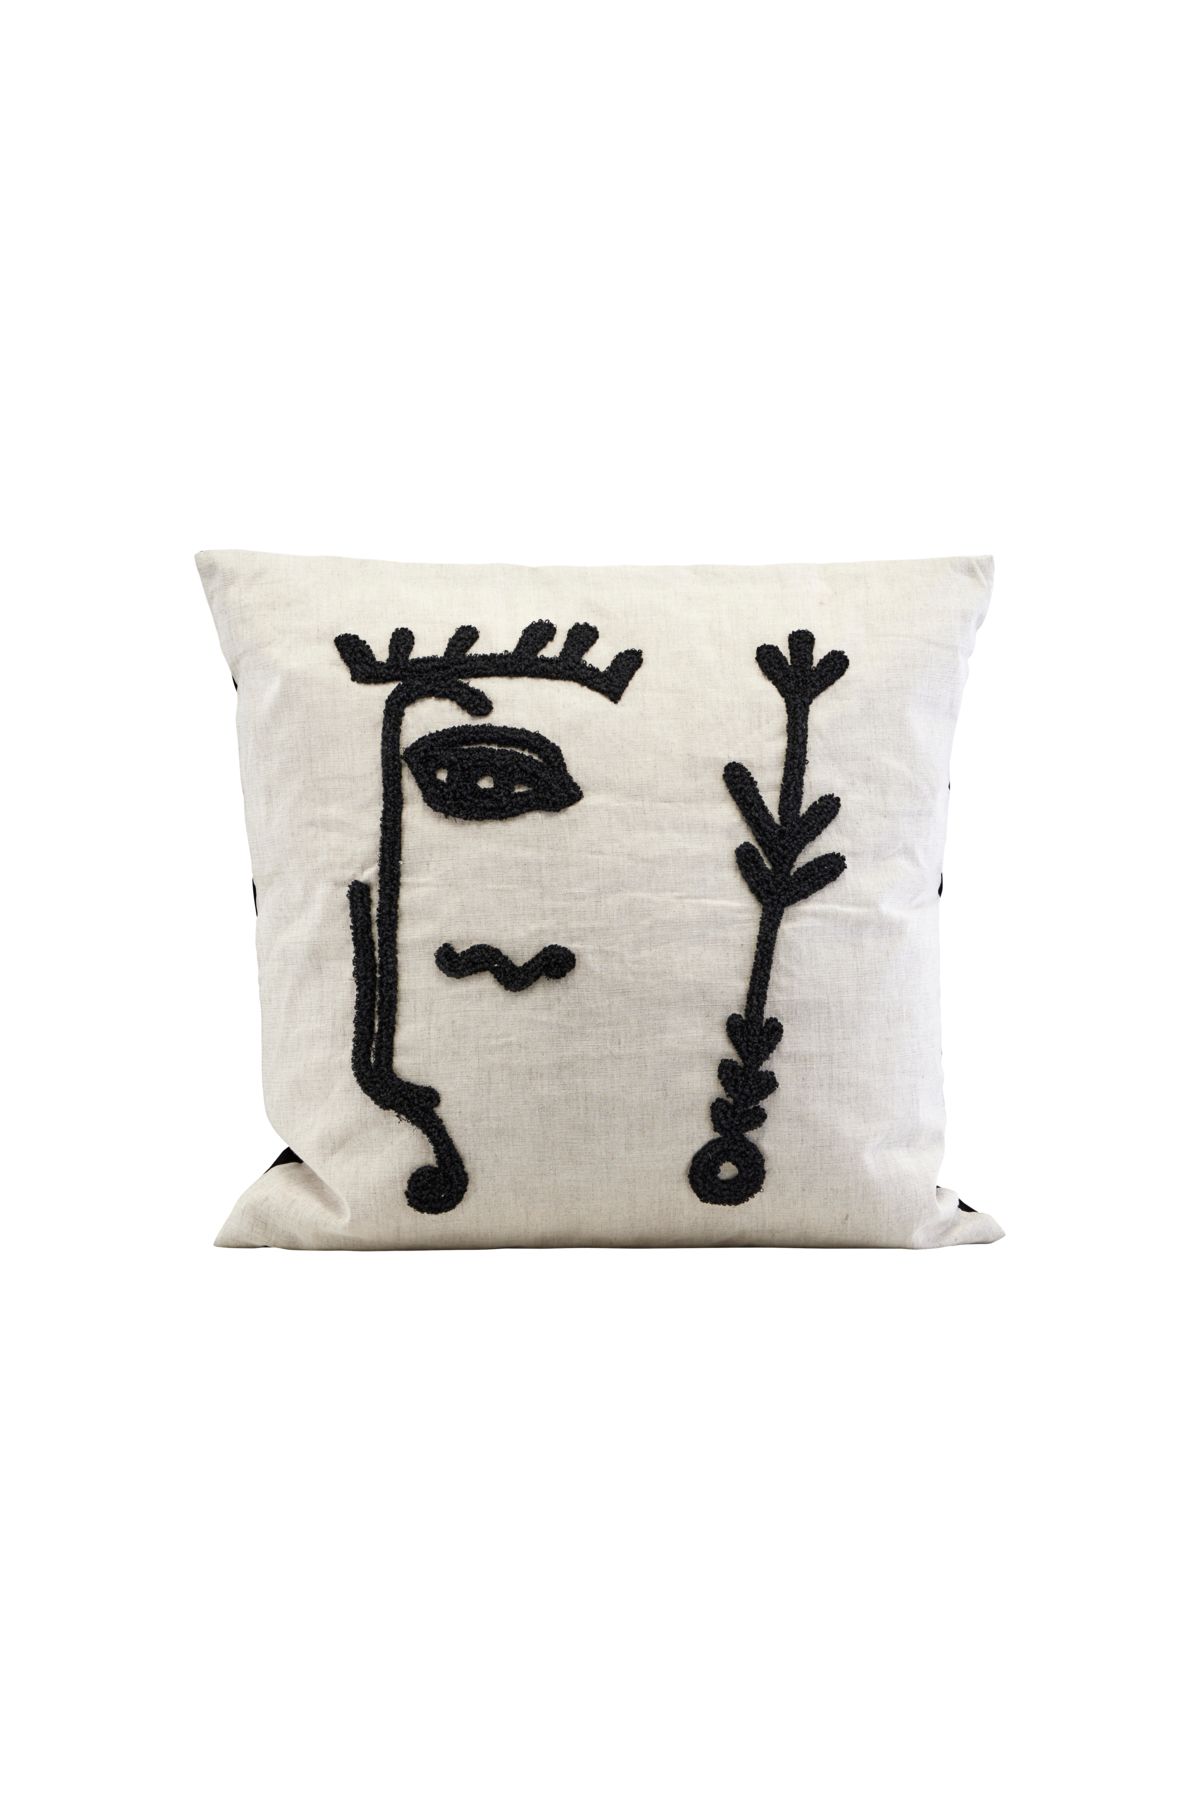 House Doctor Cotton Linen Cushion with Line Drawn Face Pattern